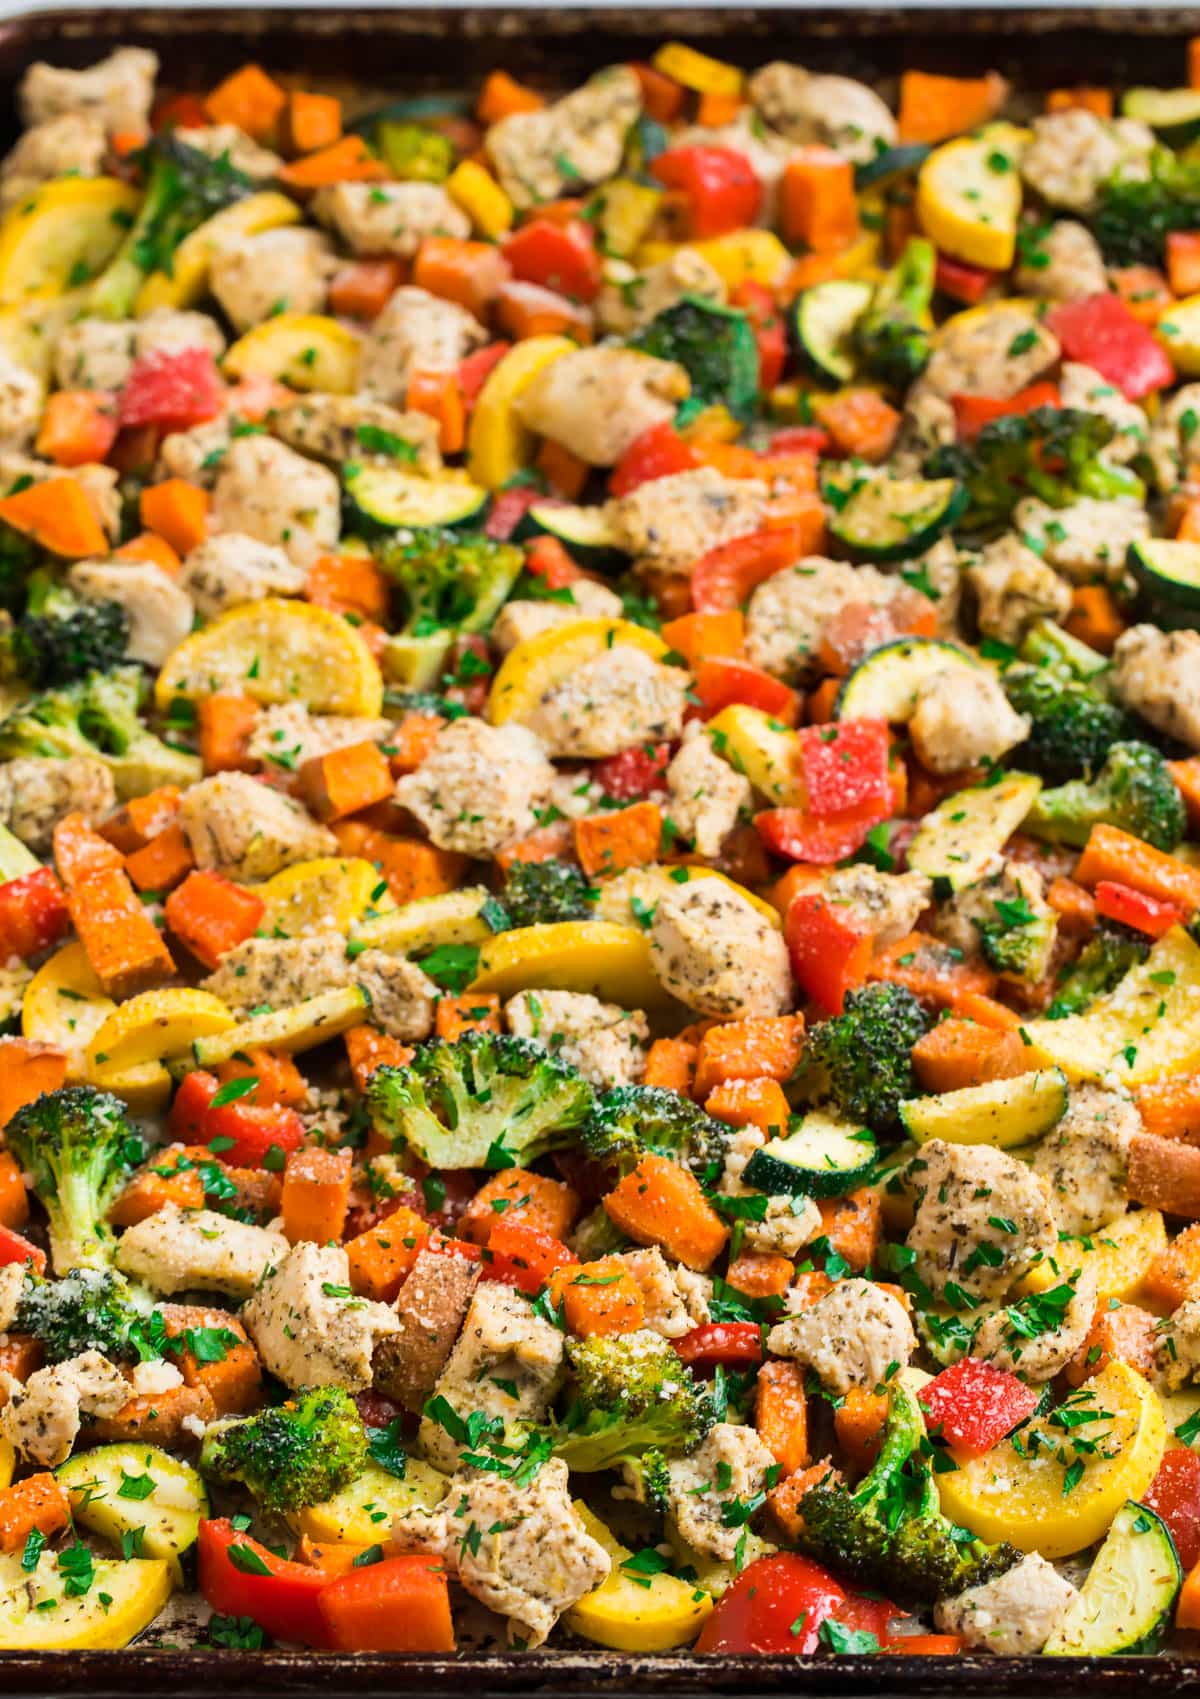 A sheet pan full of vegetables and chicken